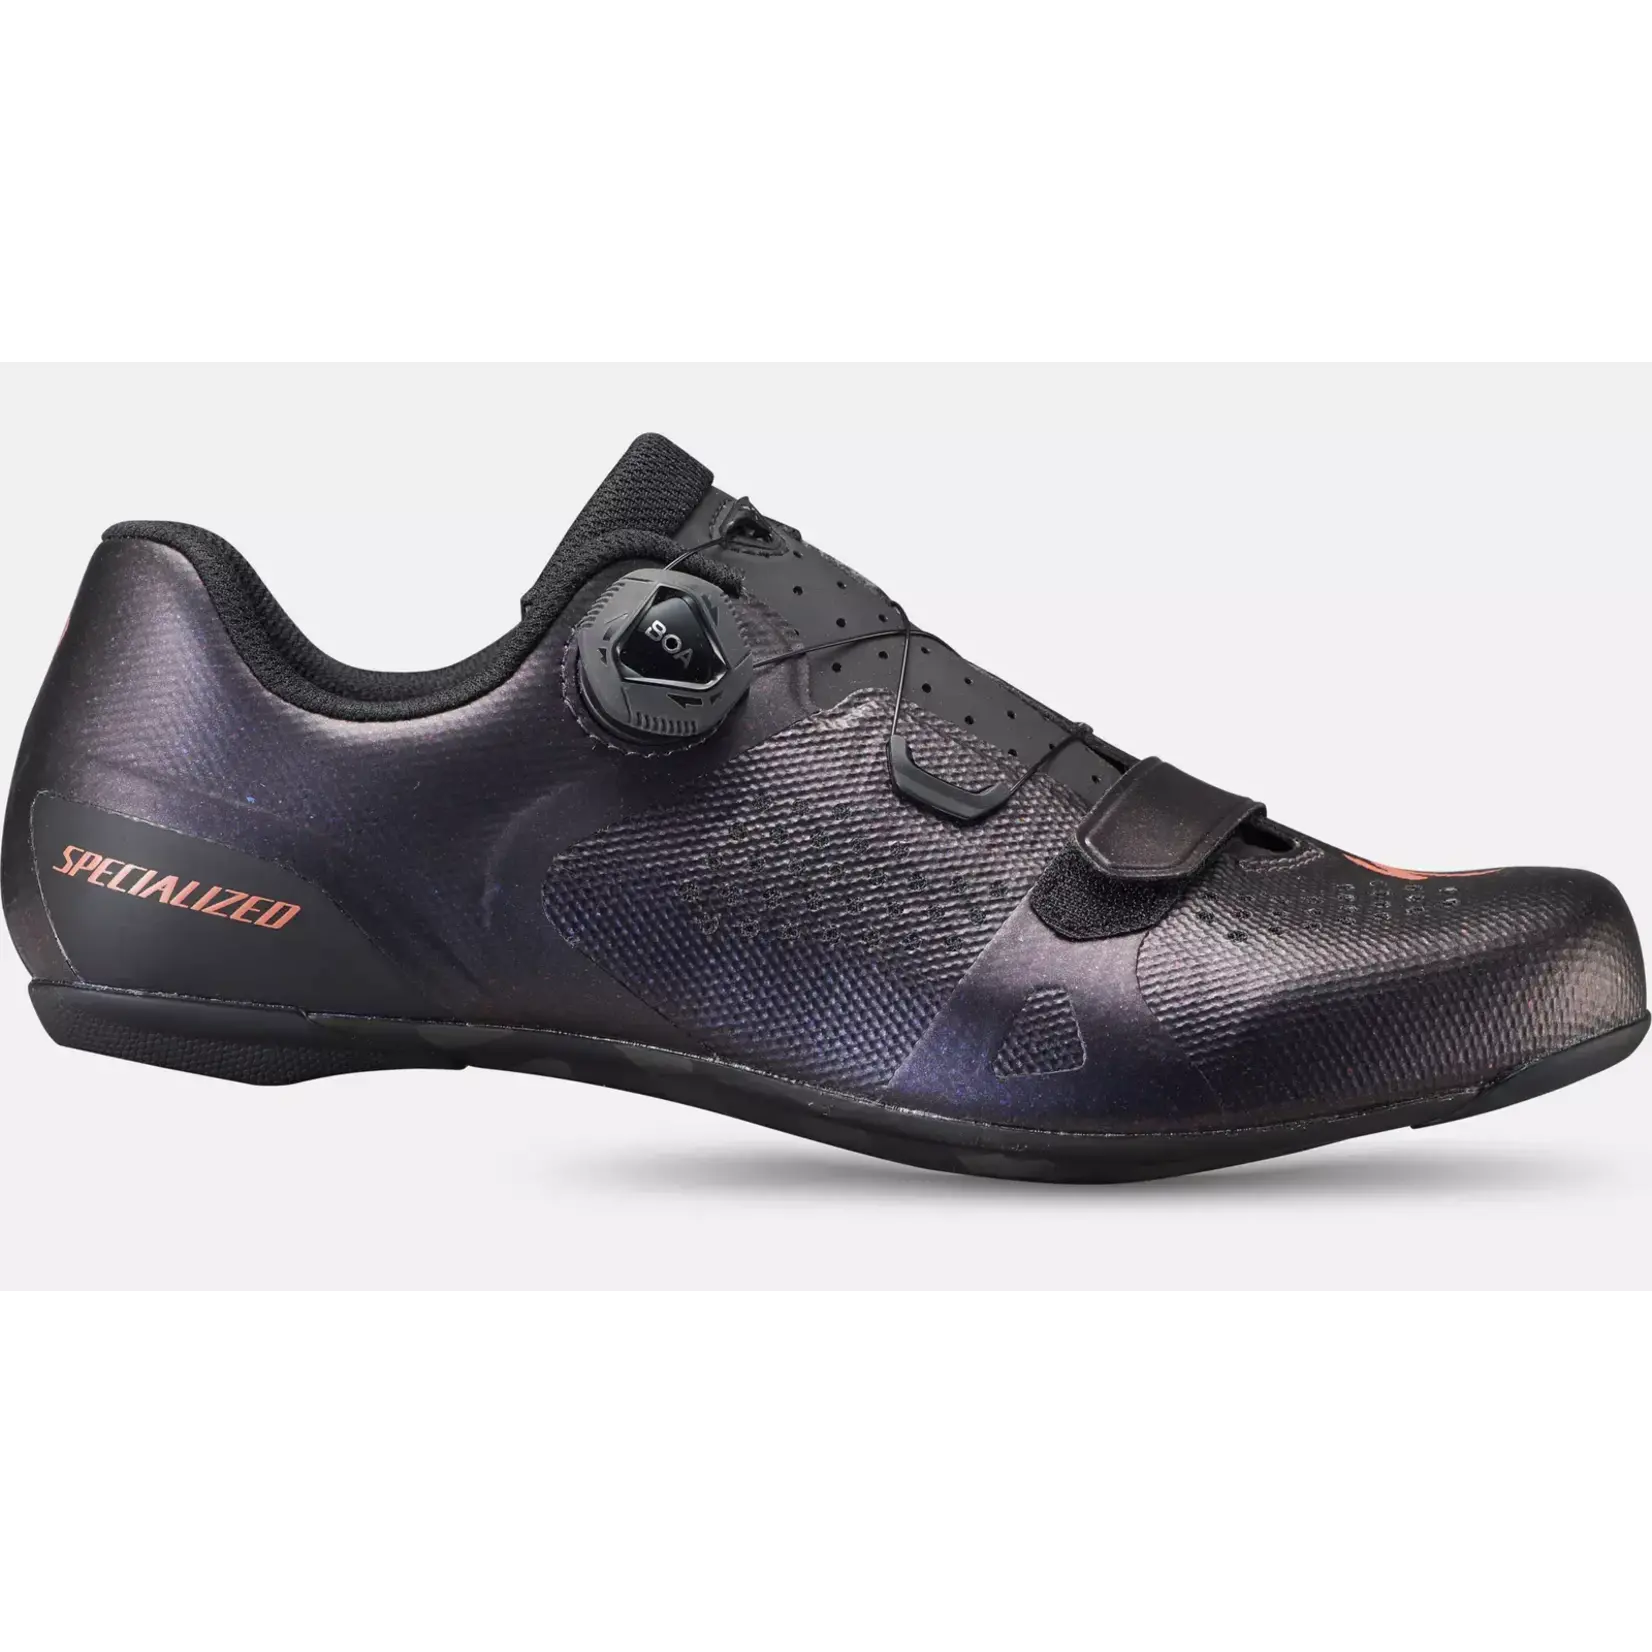 Specialized Torch 2.0  RD shoe